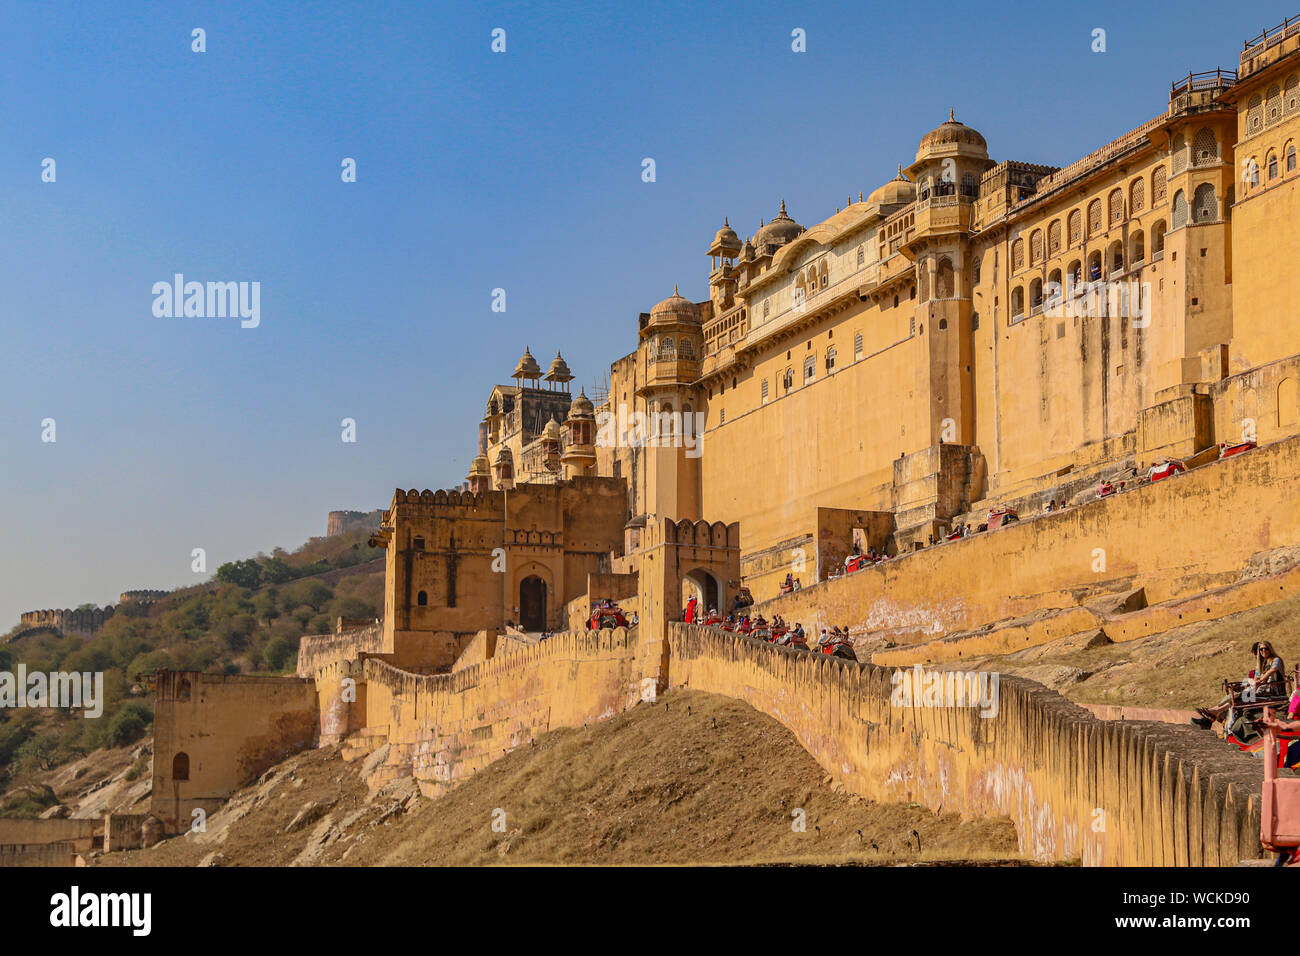 The beautiful exterior of the Amer Fort (Amber Fort), Amer, Jaipur, Rajasthan, India, Central Asia Stock Photo